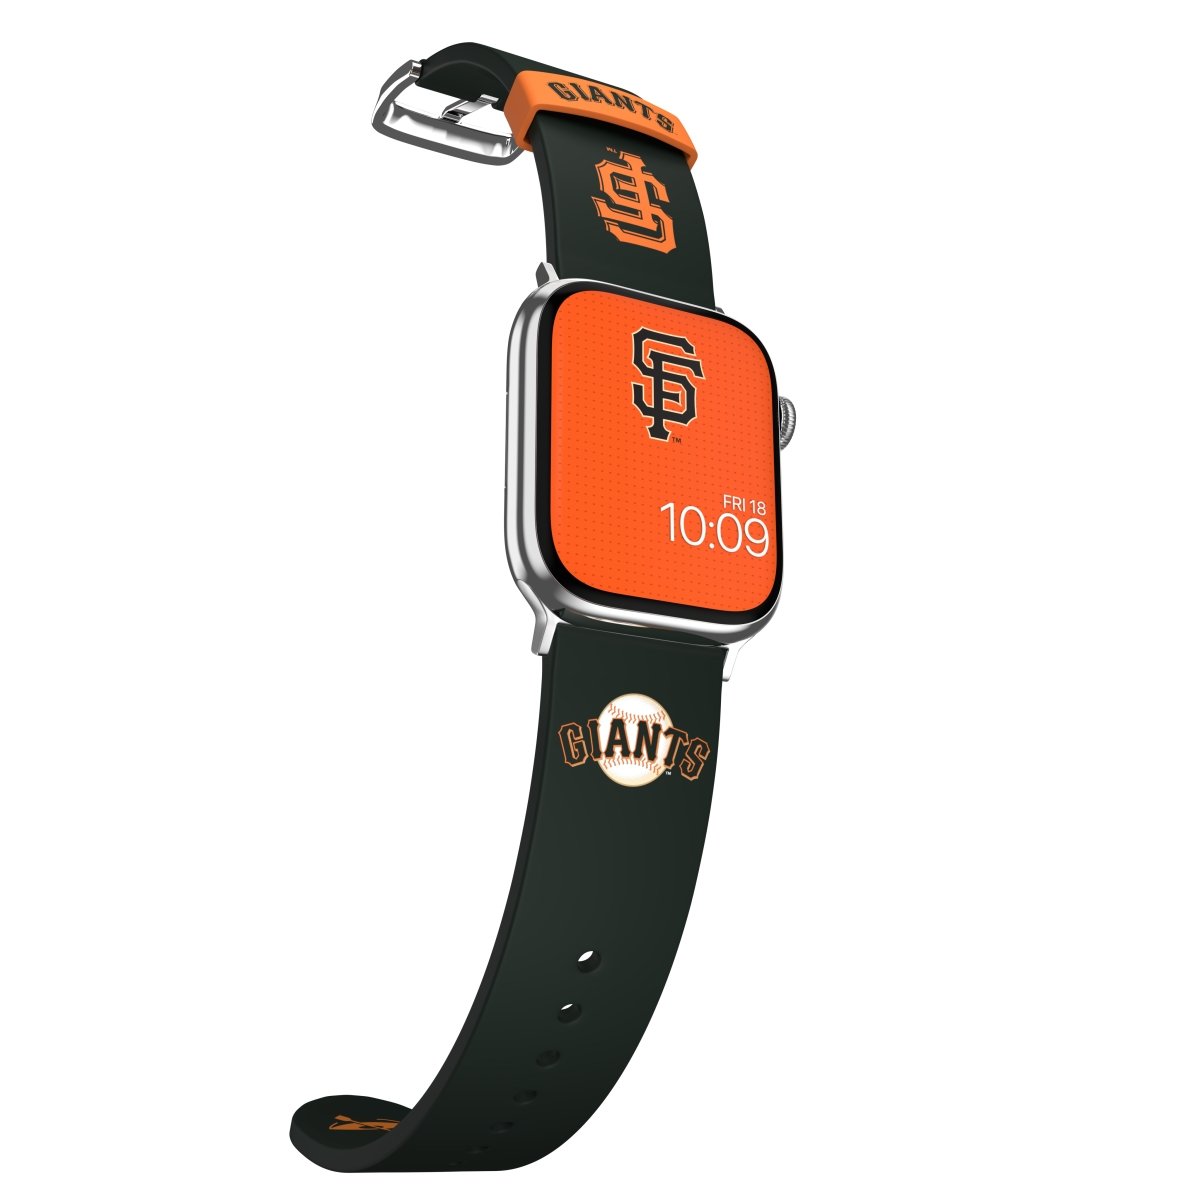 This Officially Licensed Watch Band Includes 20+ Exclusive Watch Faces MLB - St. Louis Cardinals Apple Watch Band | Officially Licensed | MobyFox